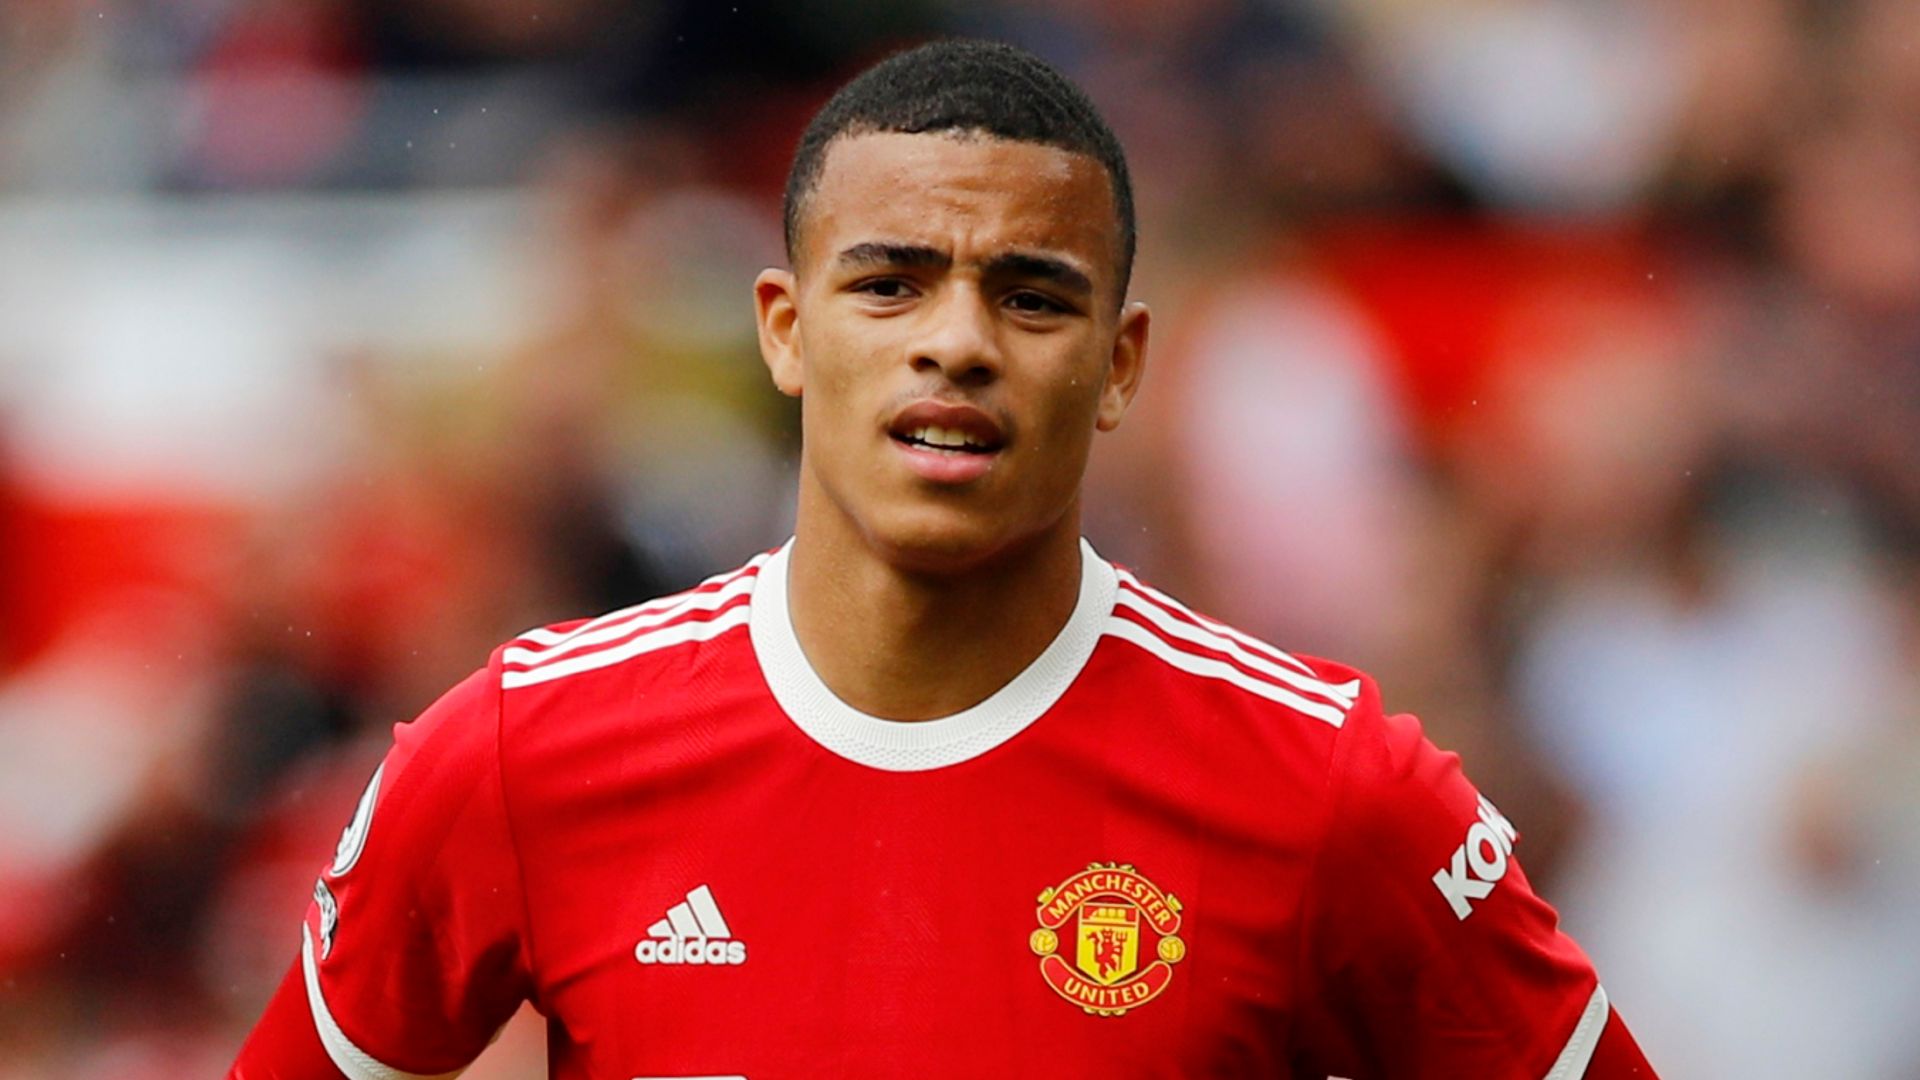 Mason Greenwood set to sign for new club - as city's mayor demands deal is scrapped